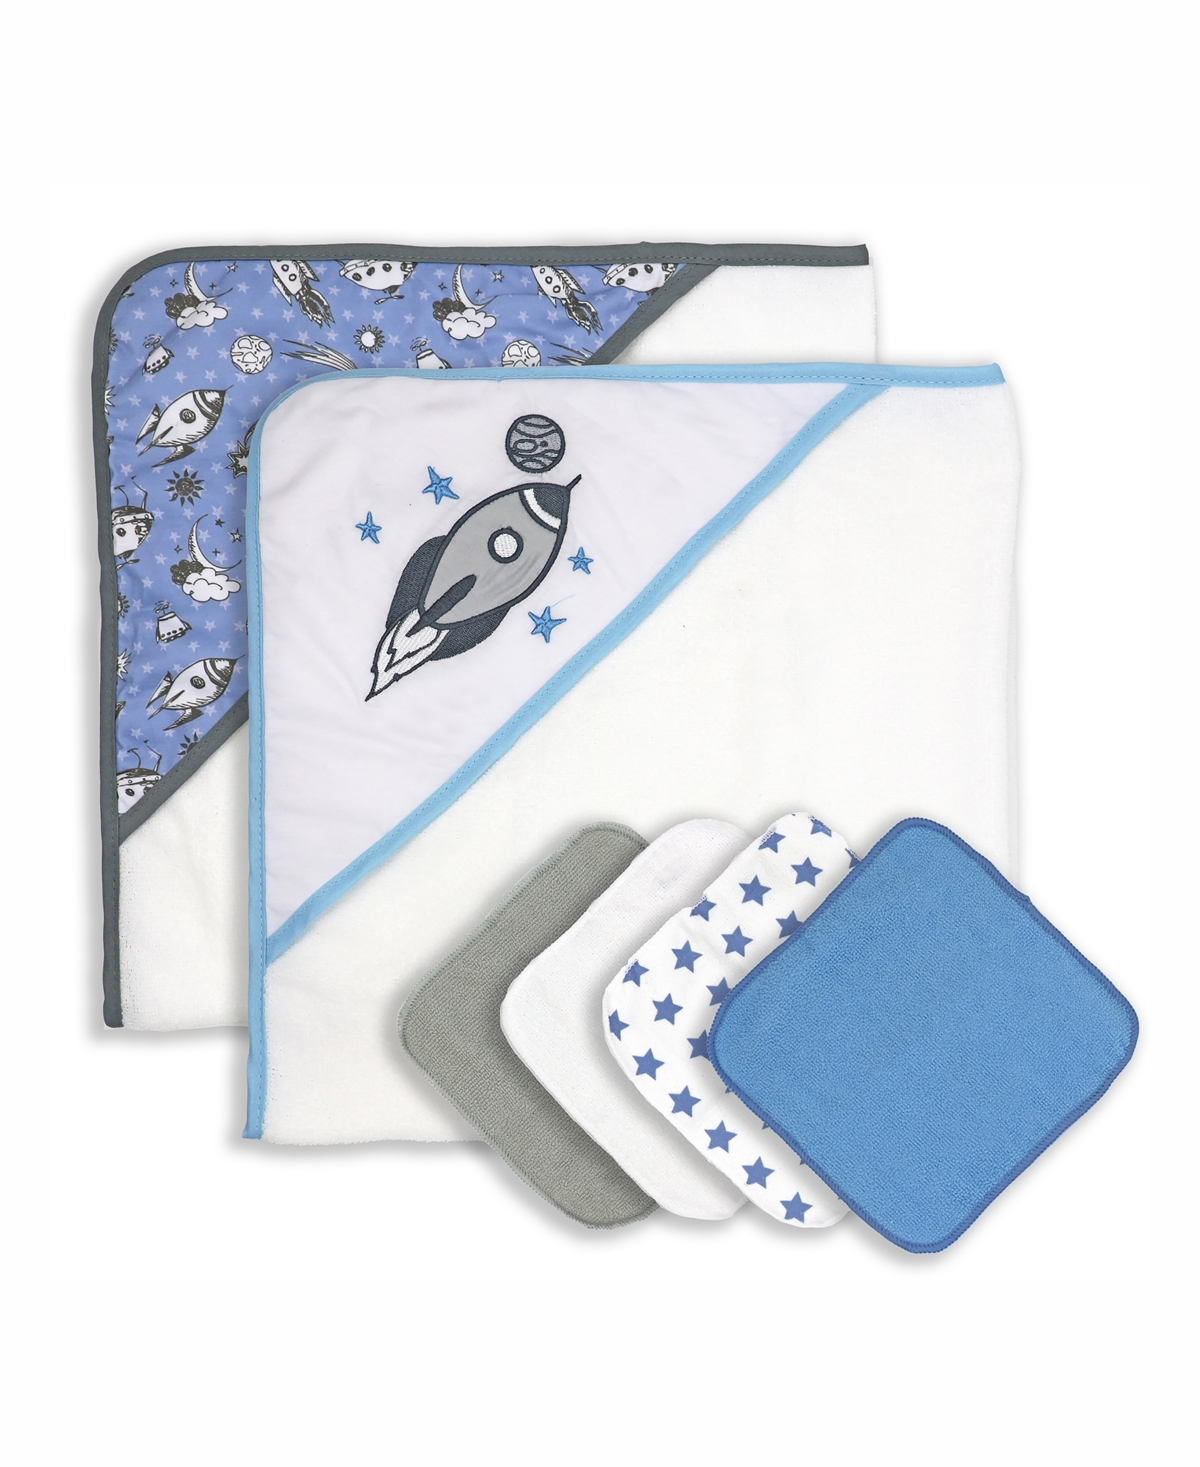 3 Stories Trading Baby Boys Hooded Towels With Washcloths, 6 Piece Set In Blue And White